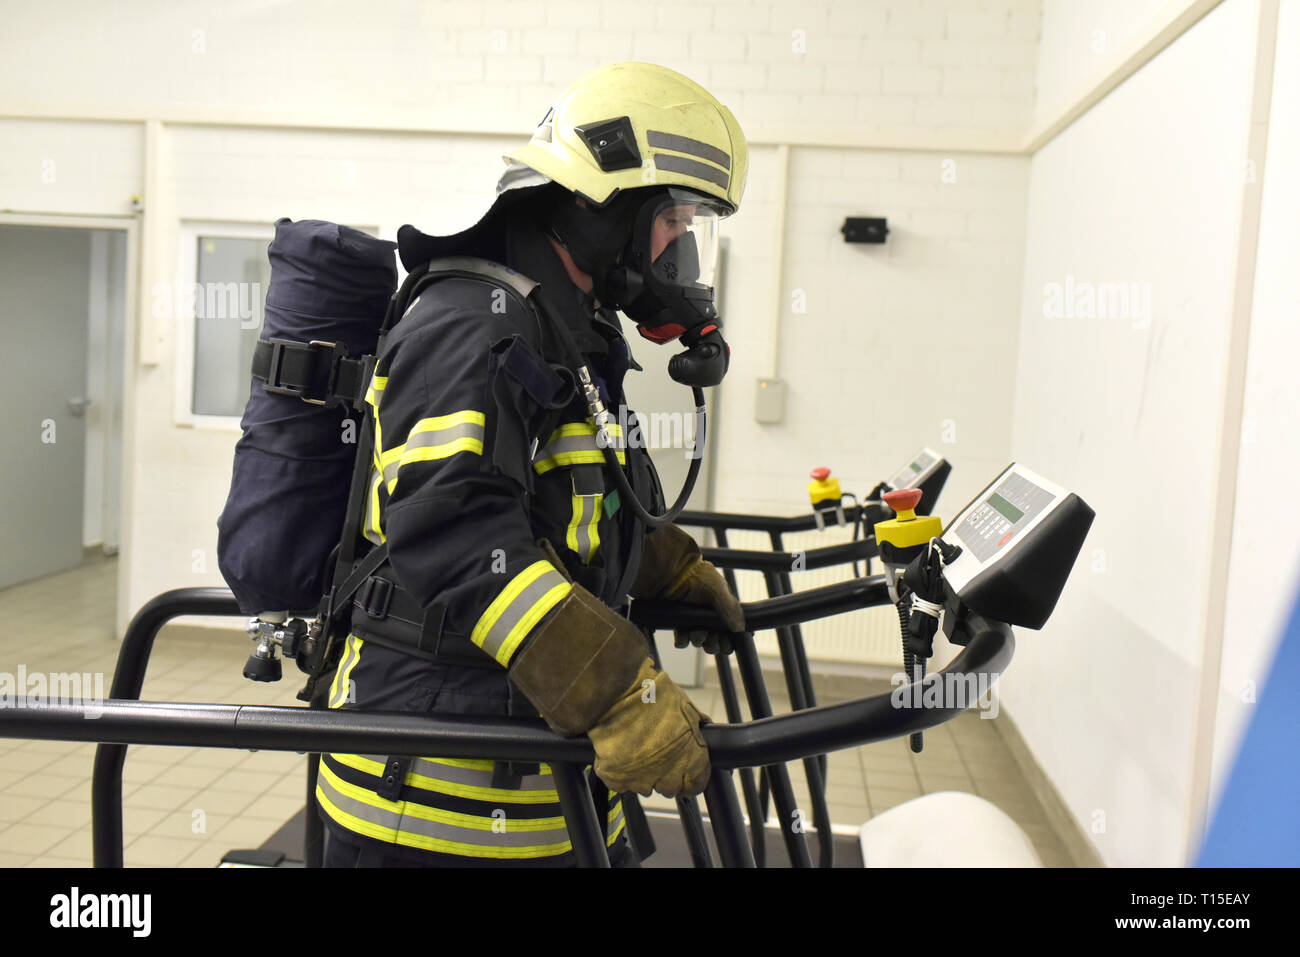 Firefighter with respirator and air tank exercising on treadmill Stock Photo